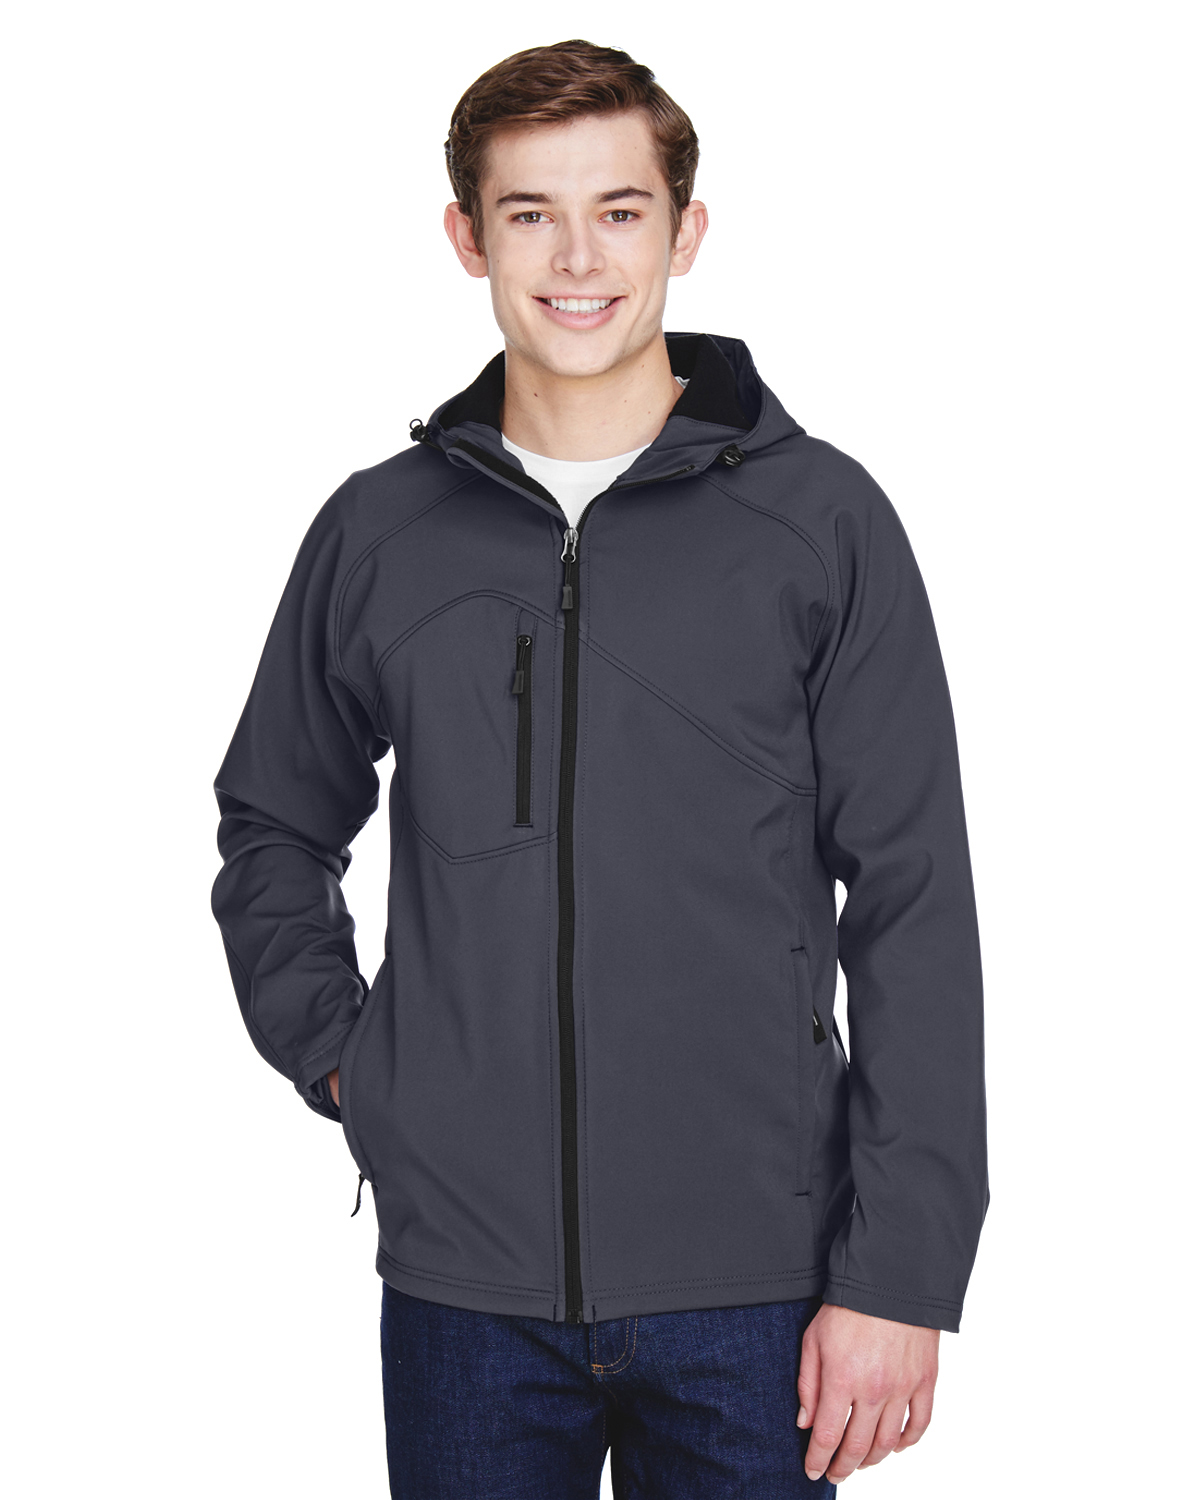 Men's Prospect Two-Layer Fleece Bonded Soft Shell Hooded Jacket - FOSSIL GREY - XL - image 1 of 3